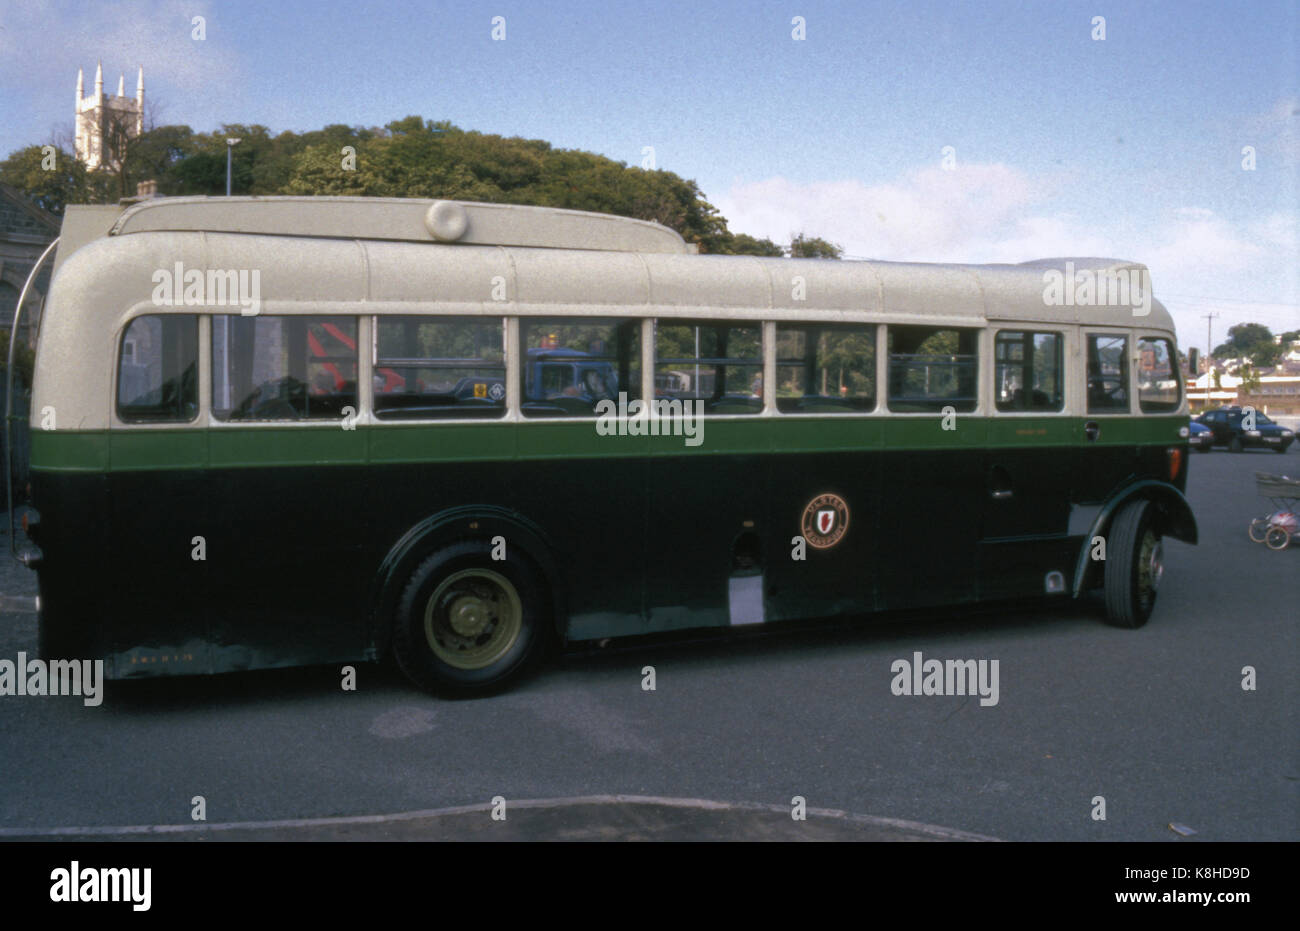 a series of images showing the old Ulster Transport Busses. - The UTA was formed by the Transport Act 1948, which merged the Northern Ireland Road Transport Board (NIRTB) and the Belfast and County Down Railway (BCDR). Added to this in 1949 was the Northern Counties Committee (NCC), owned by the British Transport Commission's Railway Executive since its previous owner, the London, Midland and Scottish Railway (LMS), had been nationalised in 1948. In January 1950 the UTA closed almost the entire BCDR network except the Queen's Quay, Belfast – Bangor commuter line.  In the same year it closed th Stock Photo